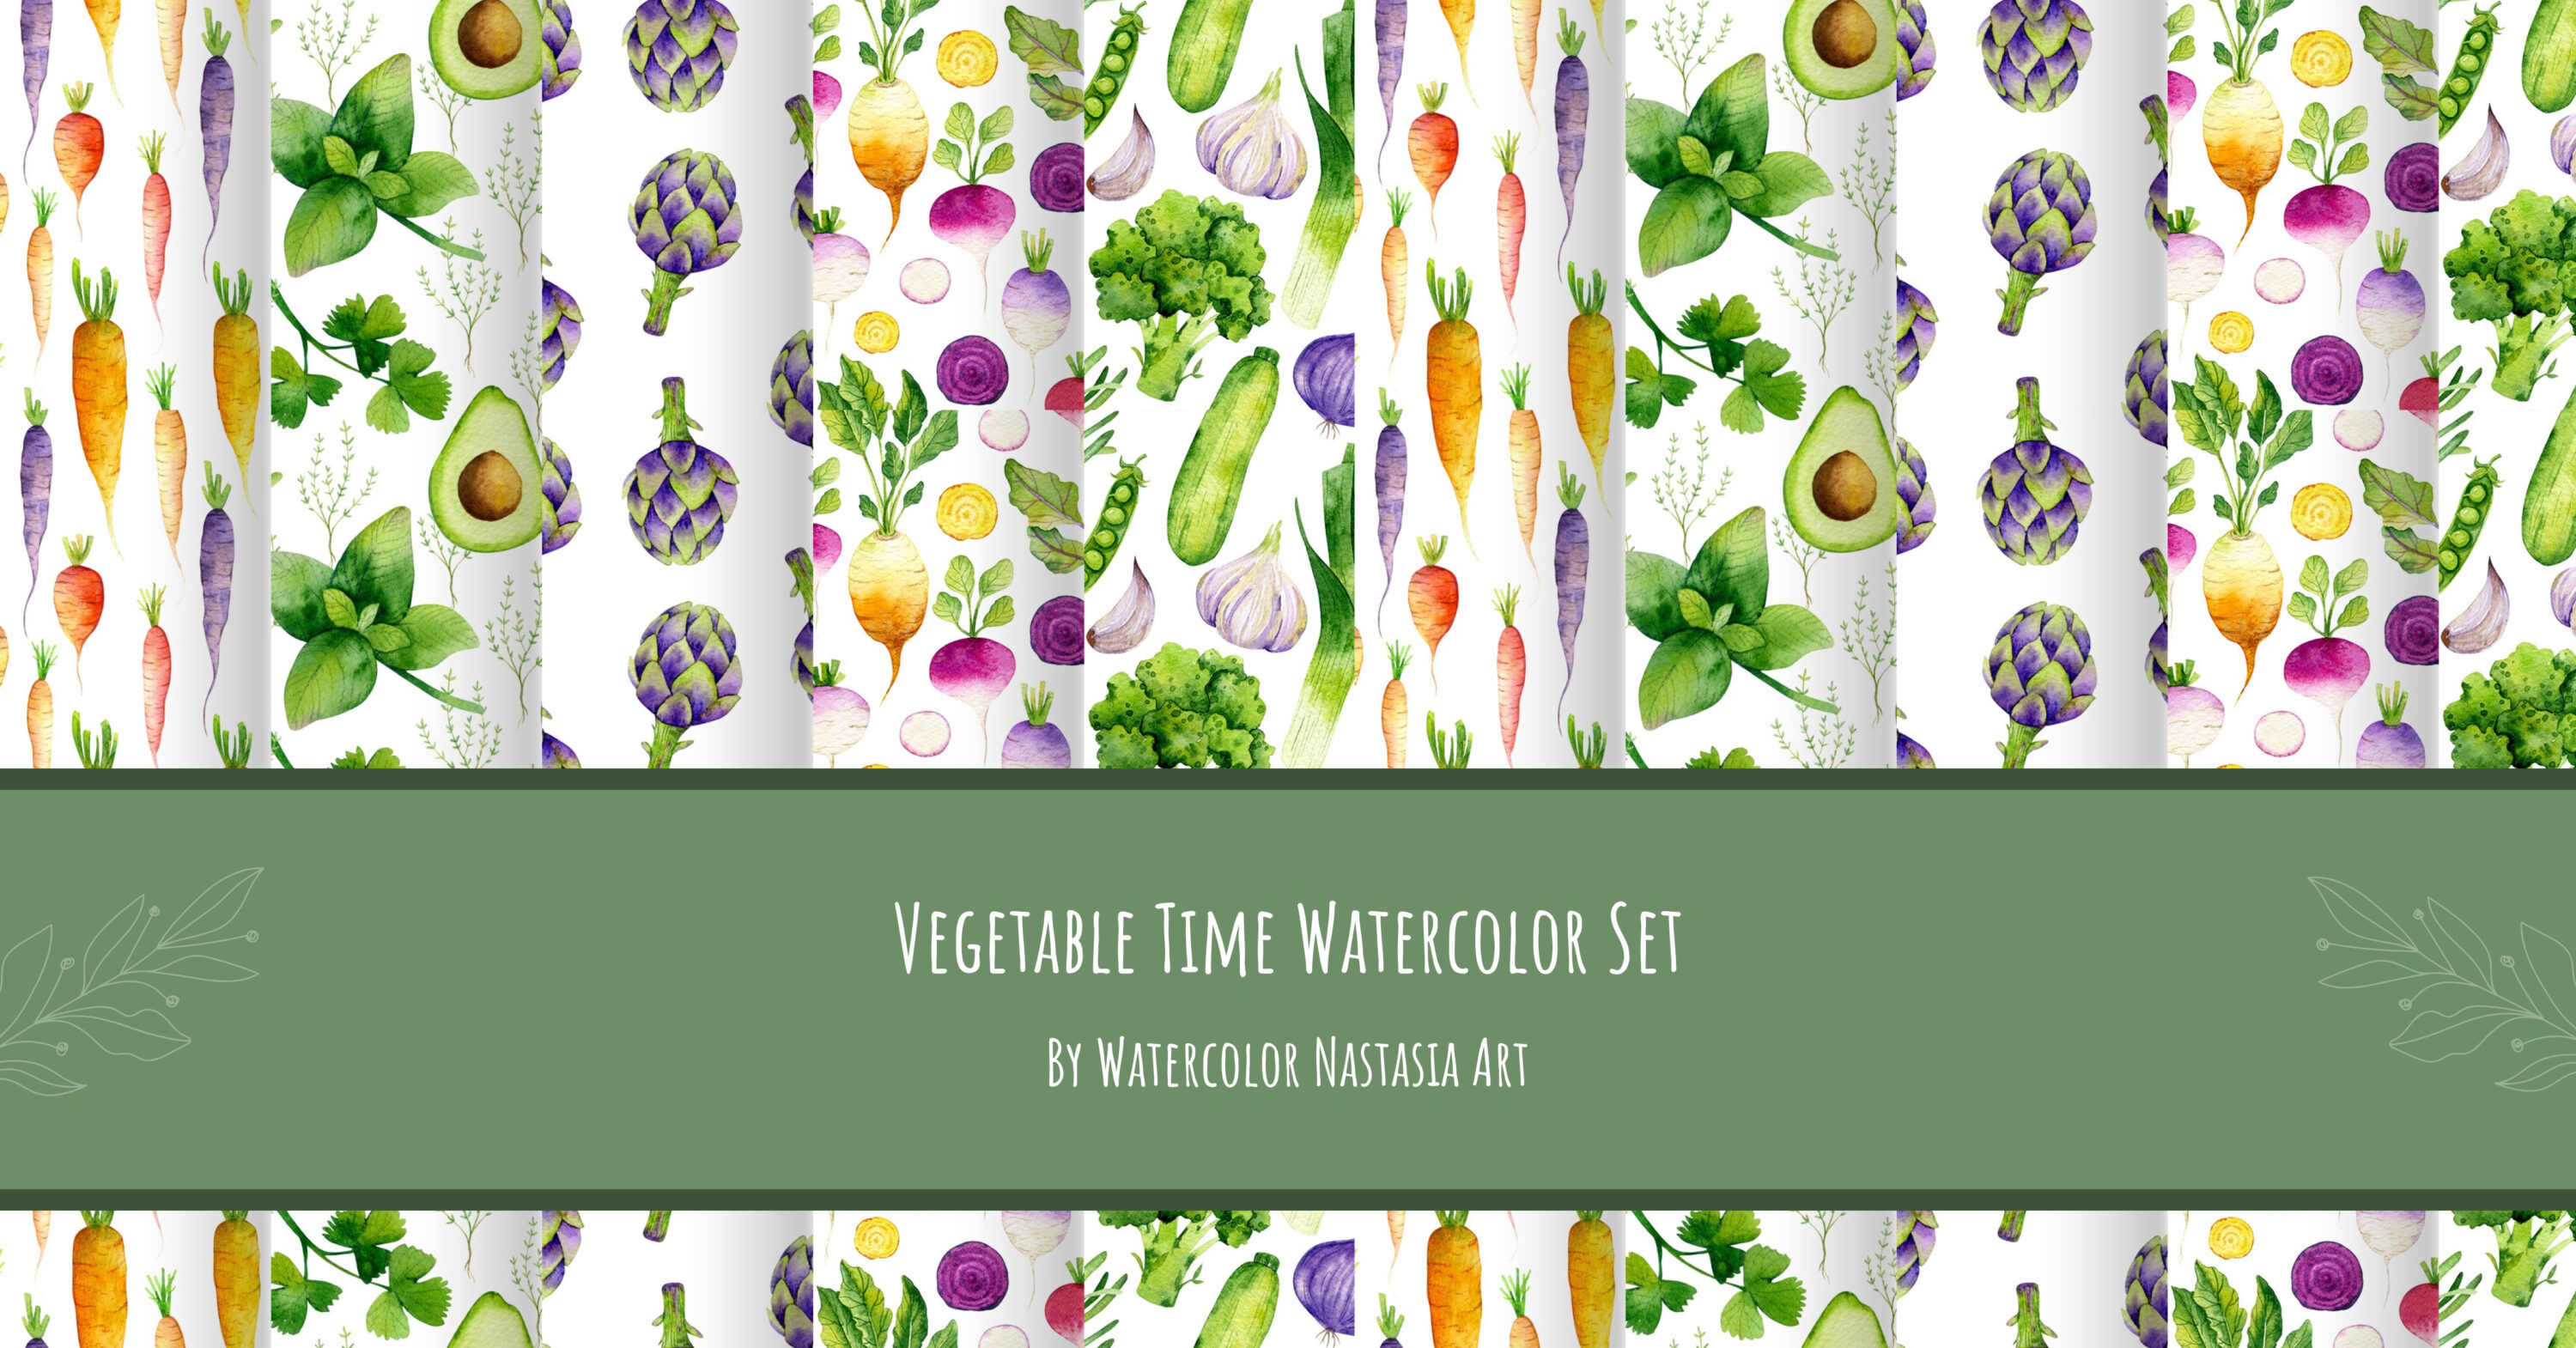 Vegetable time watercolor set for facebook.